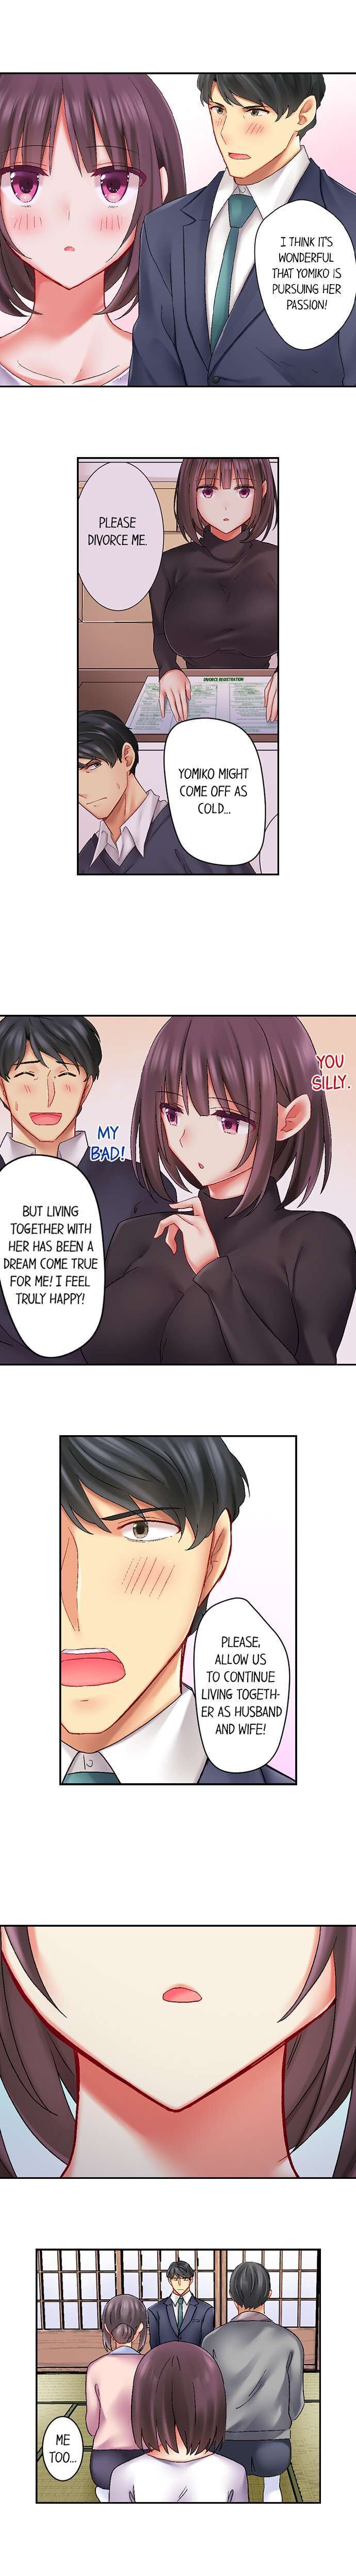 Our Kinky Newlywed Life - Chapter 16 Page 6